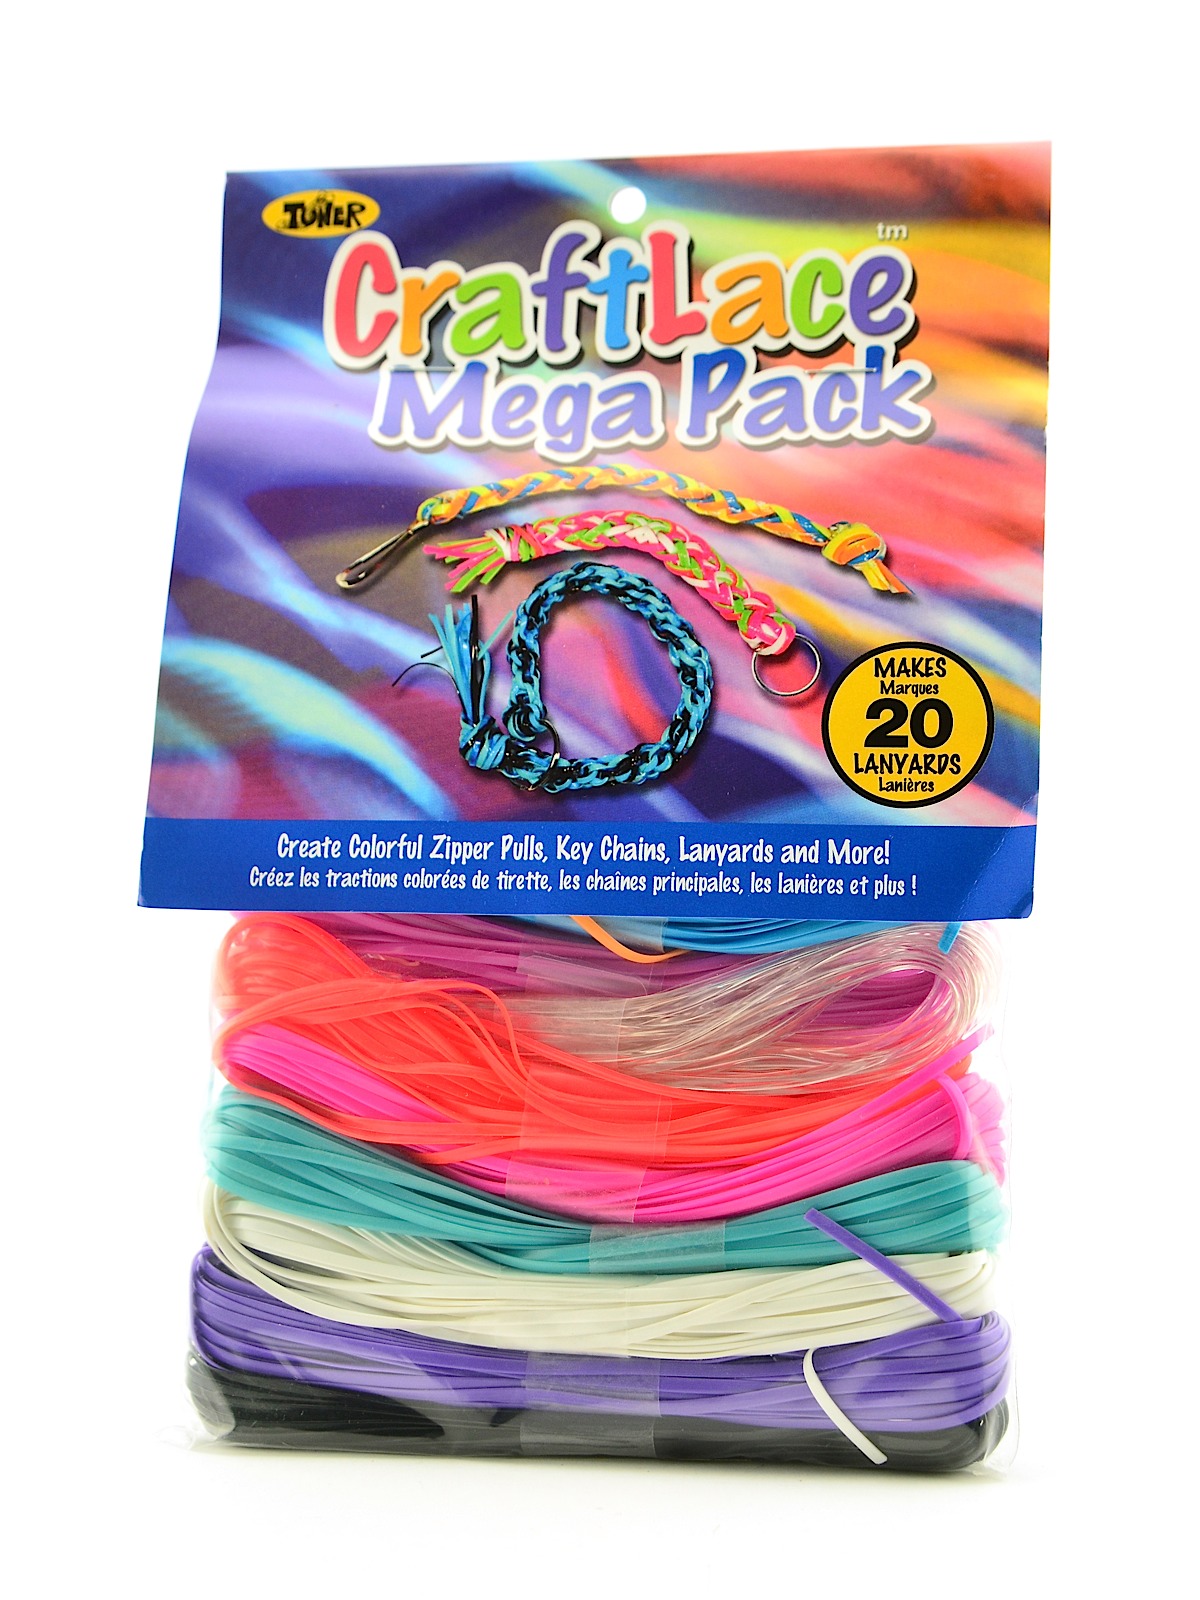 Craft Lace Packs Mega Makes 20 Projects